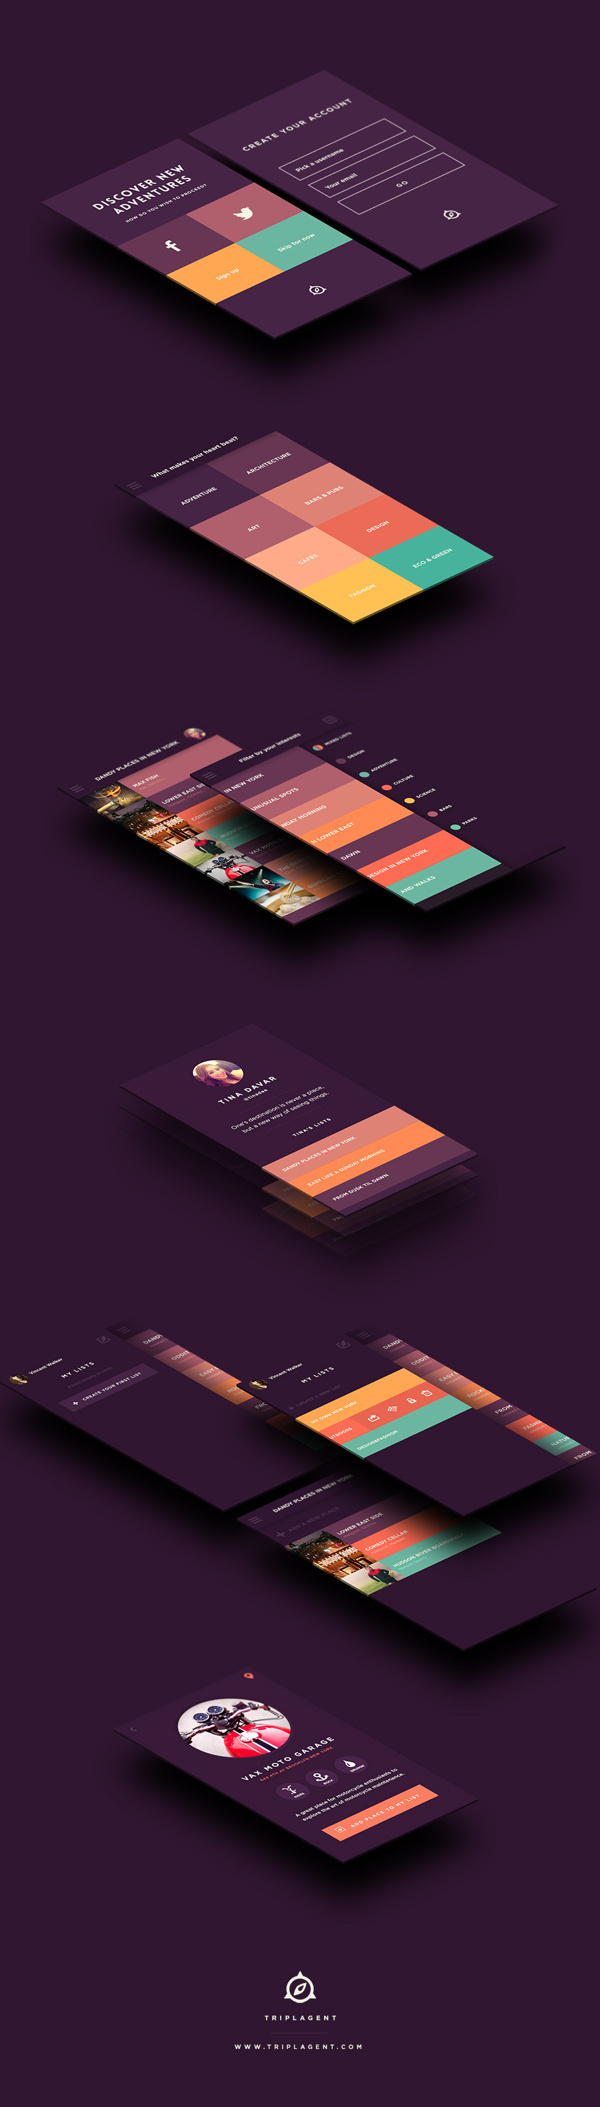 TriplAgent Branding and Design #flat #user #ui #experience #mobile